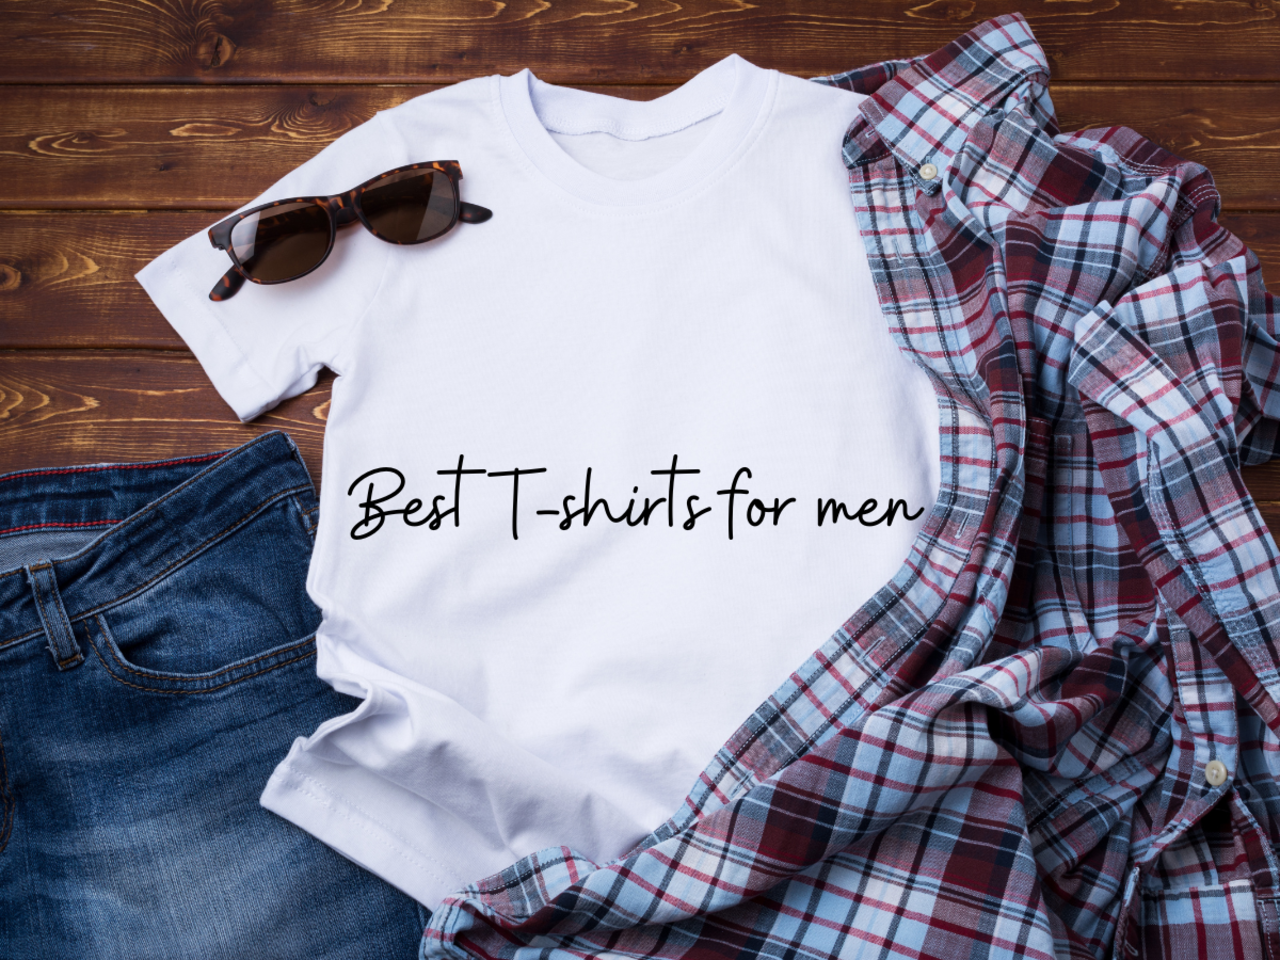 Men T Shirts Online - Buy Mens Polo & Fashion T Shirts in India